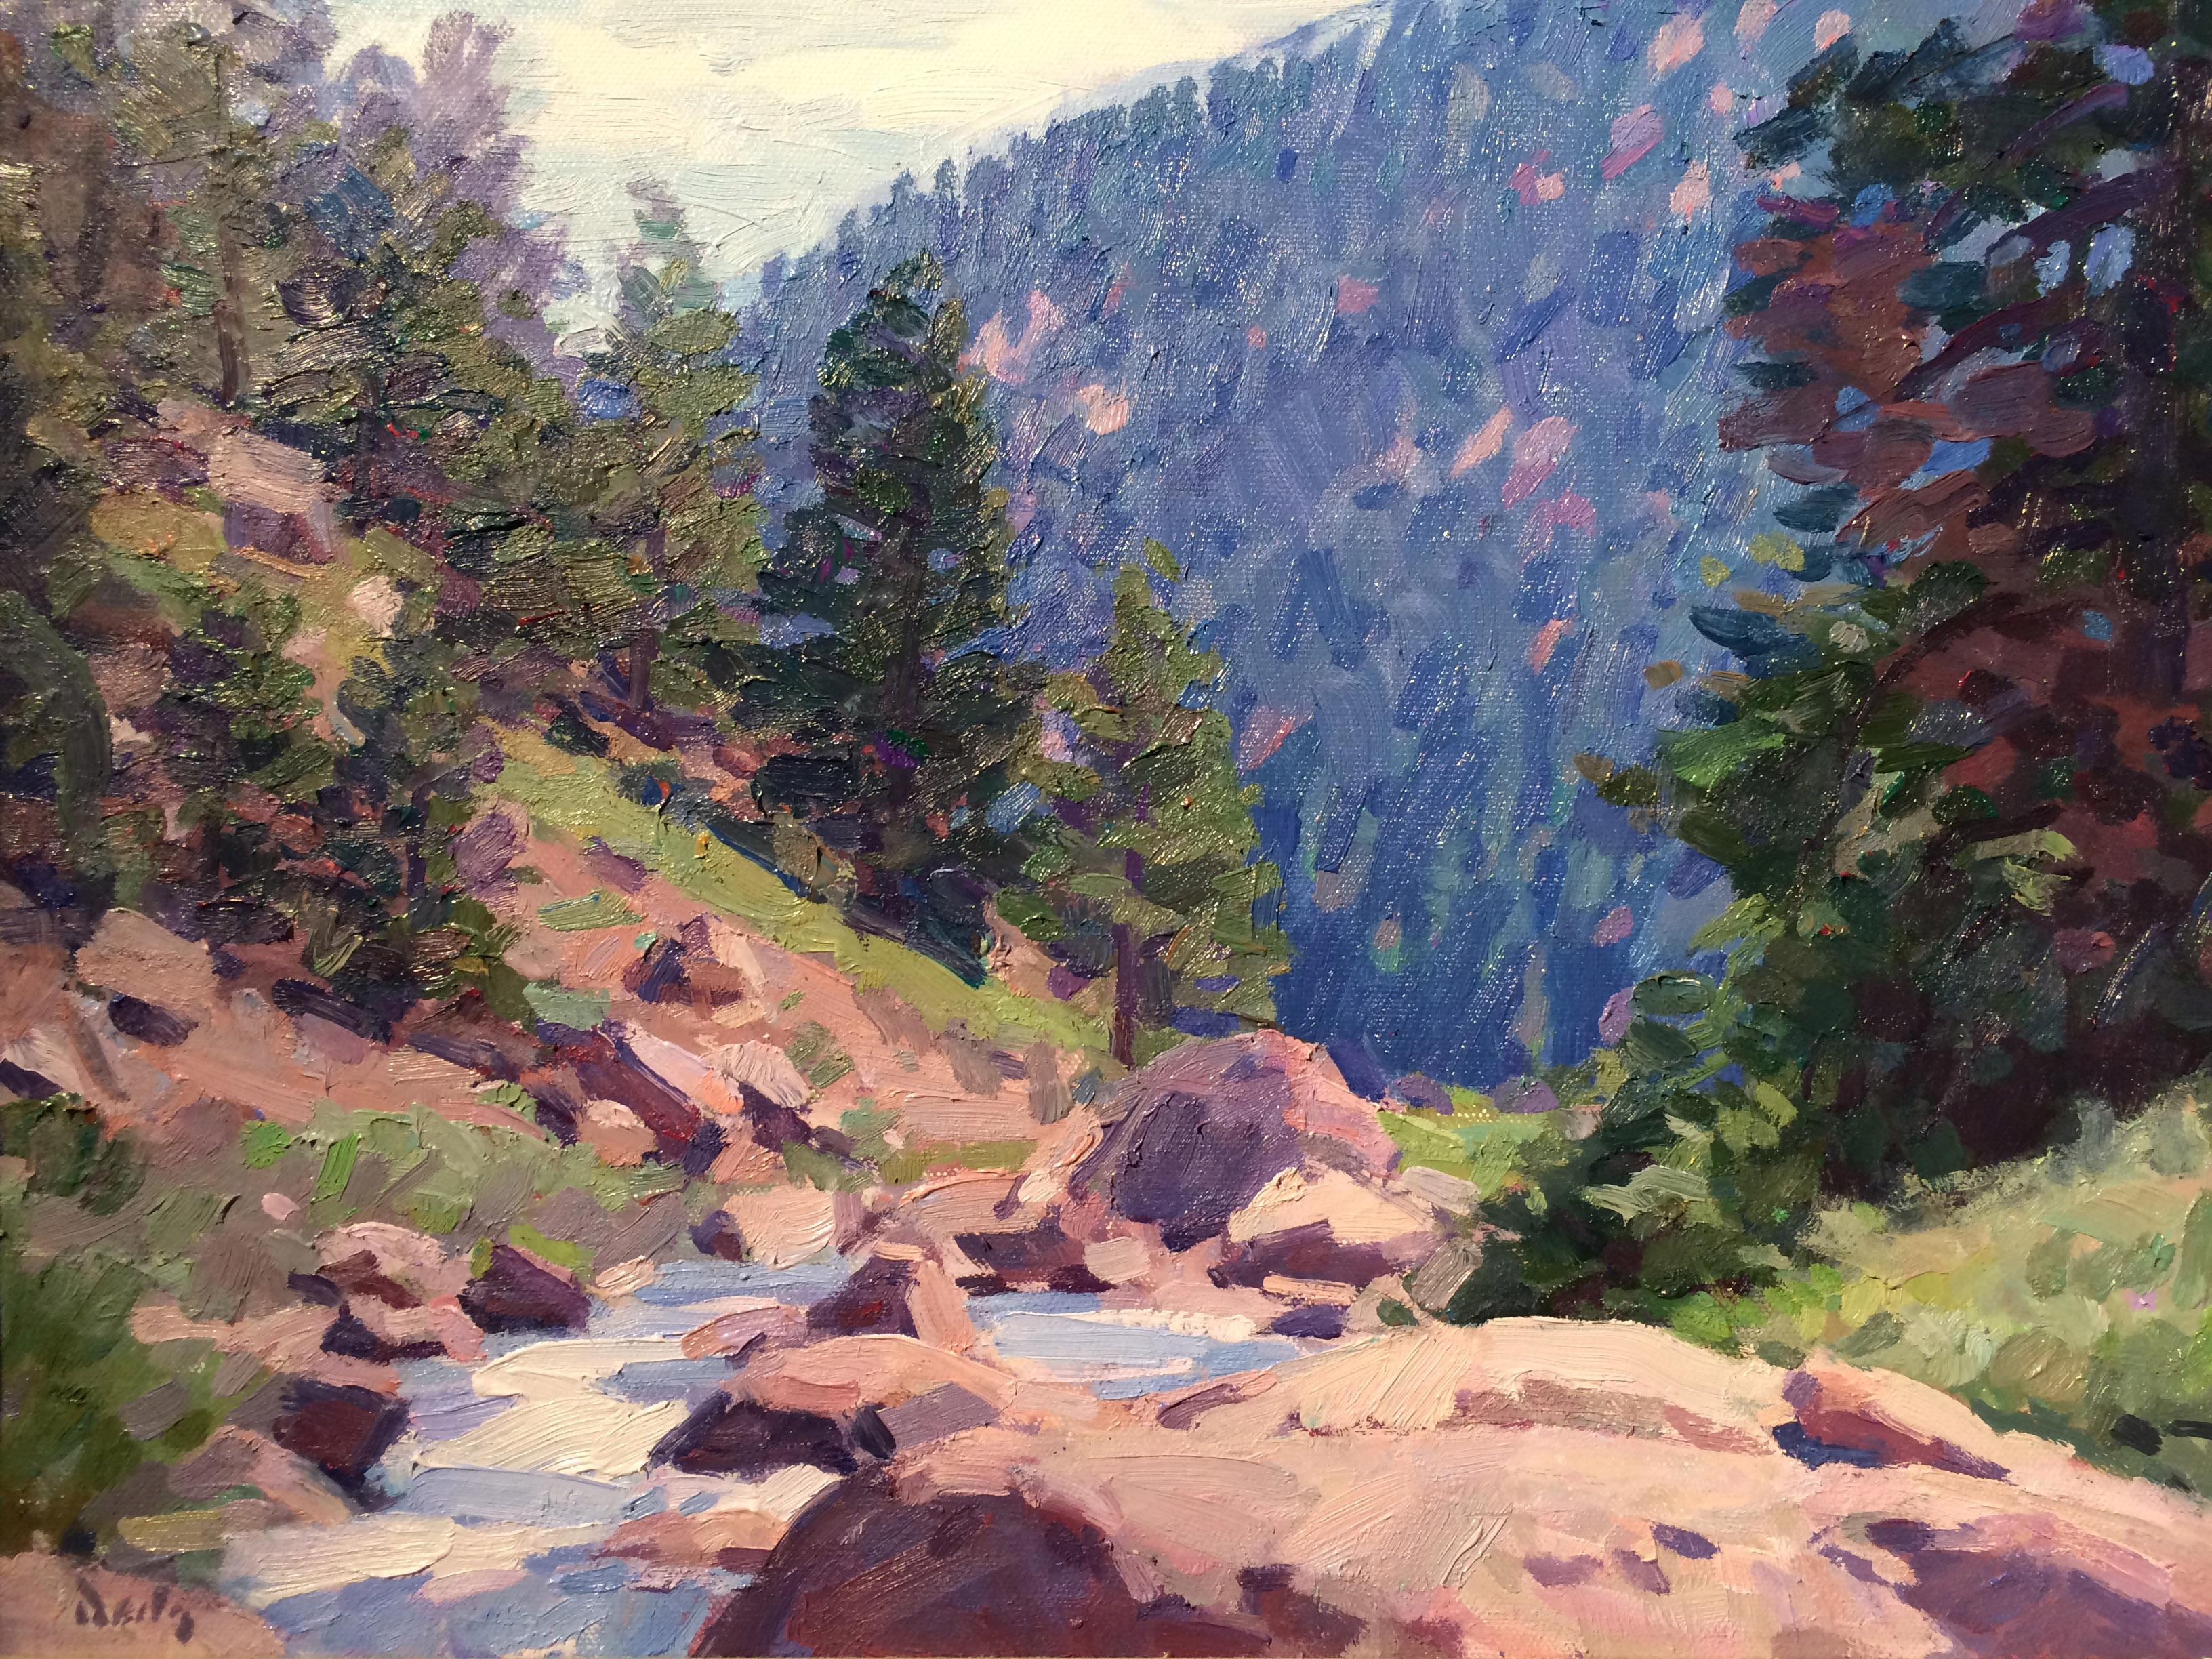 Mark Daily Figurative Painting - "Afternoon on the North Fork Platte" Oil Painting